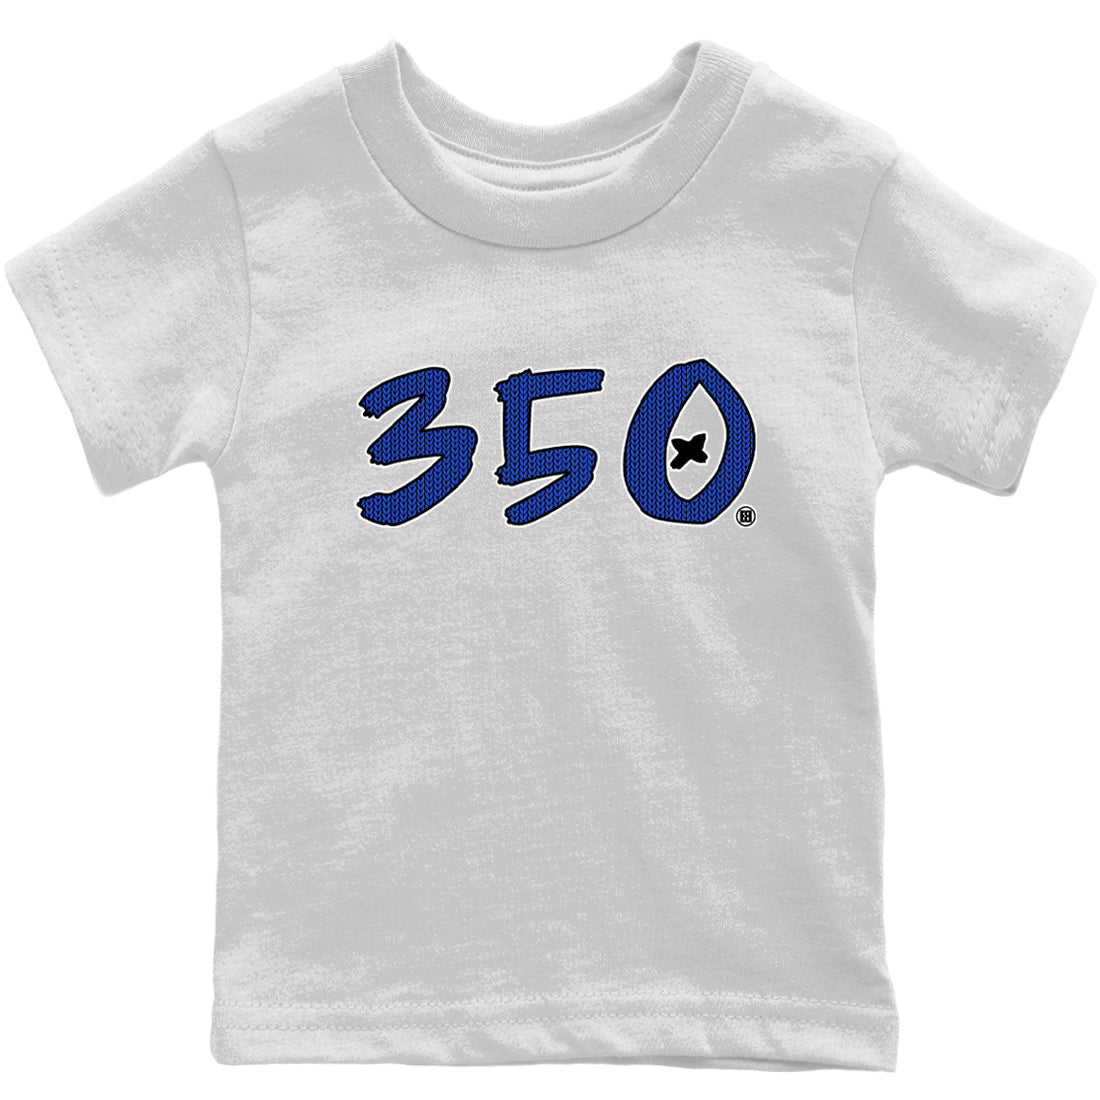 Yeezy 350 Dazzling Blue Sneaker Match Tees Number 350 Sneaker Tees Yeezy 350 Dazzling Blue Sneaker Release Tees Kids Shirts